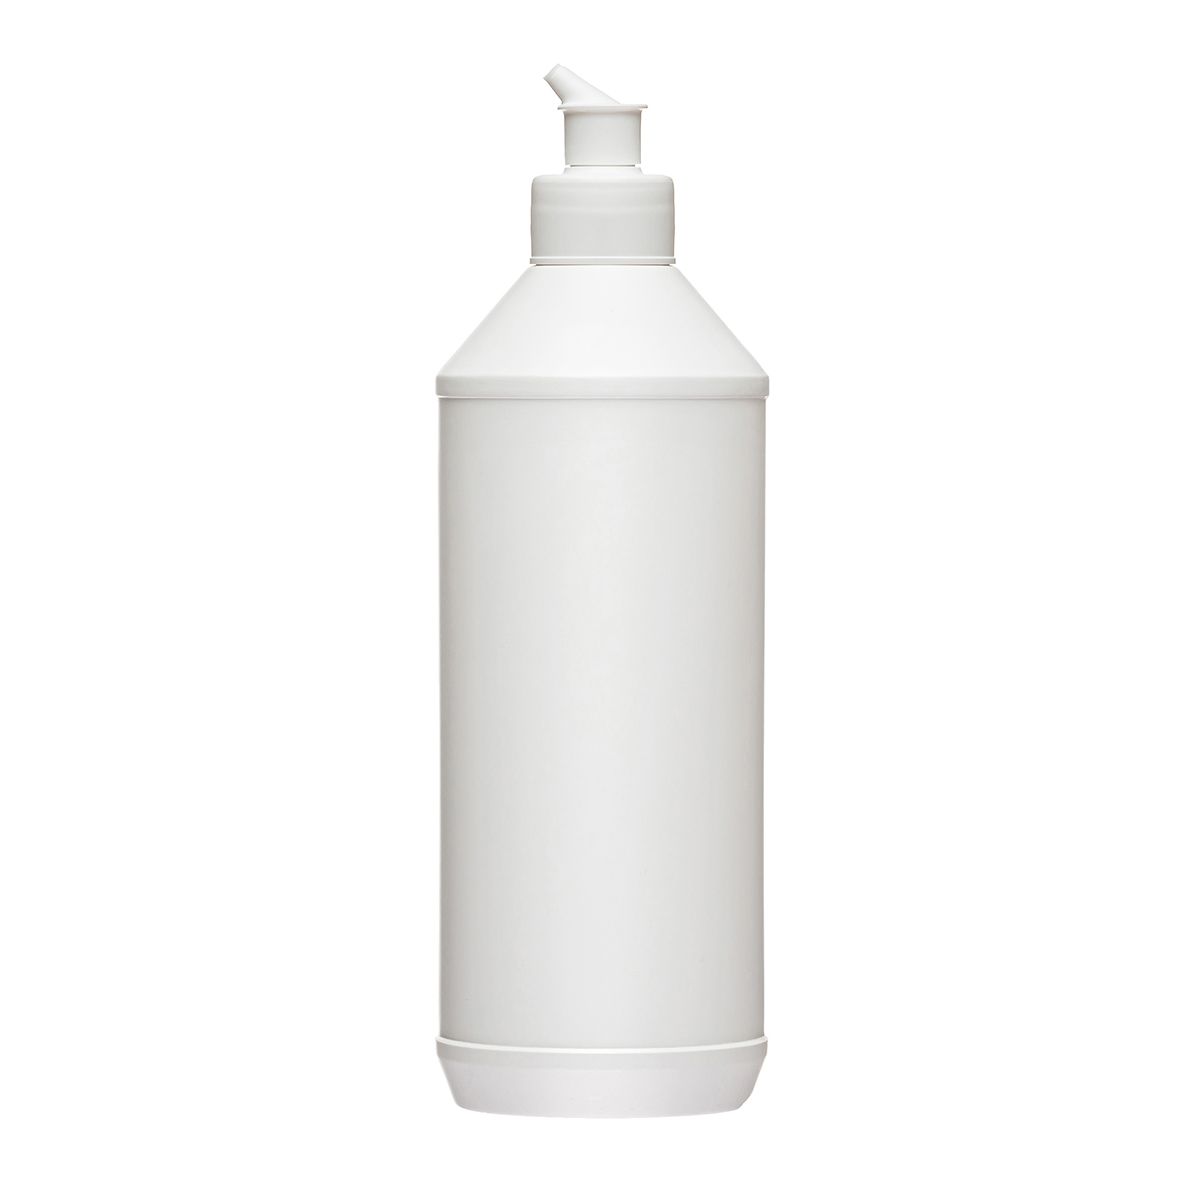 The 500 ml HDPE bottle Max 500 is perfect choice for any product in household chemicals.  This series of bottles is presented in different volumes: 500 ml and 800 ml. by Pack Store Europe, packstore.eu